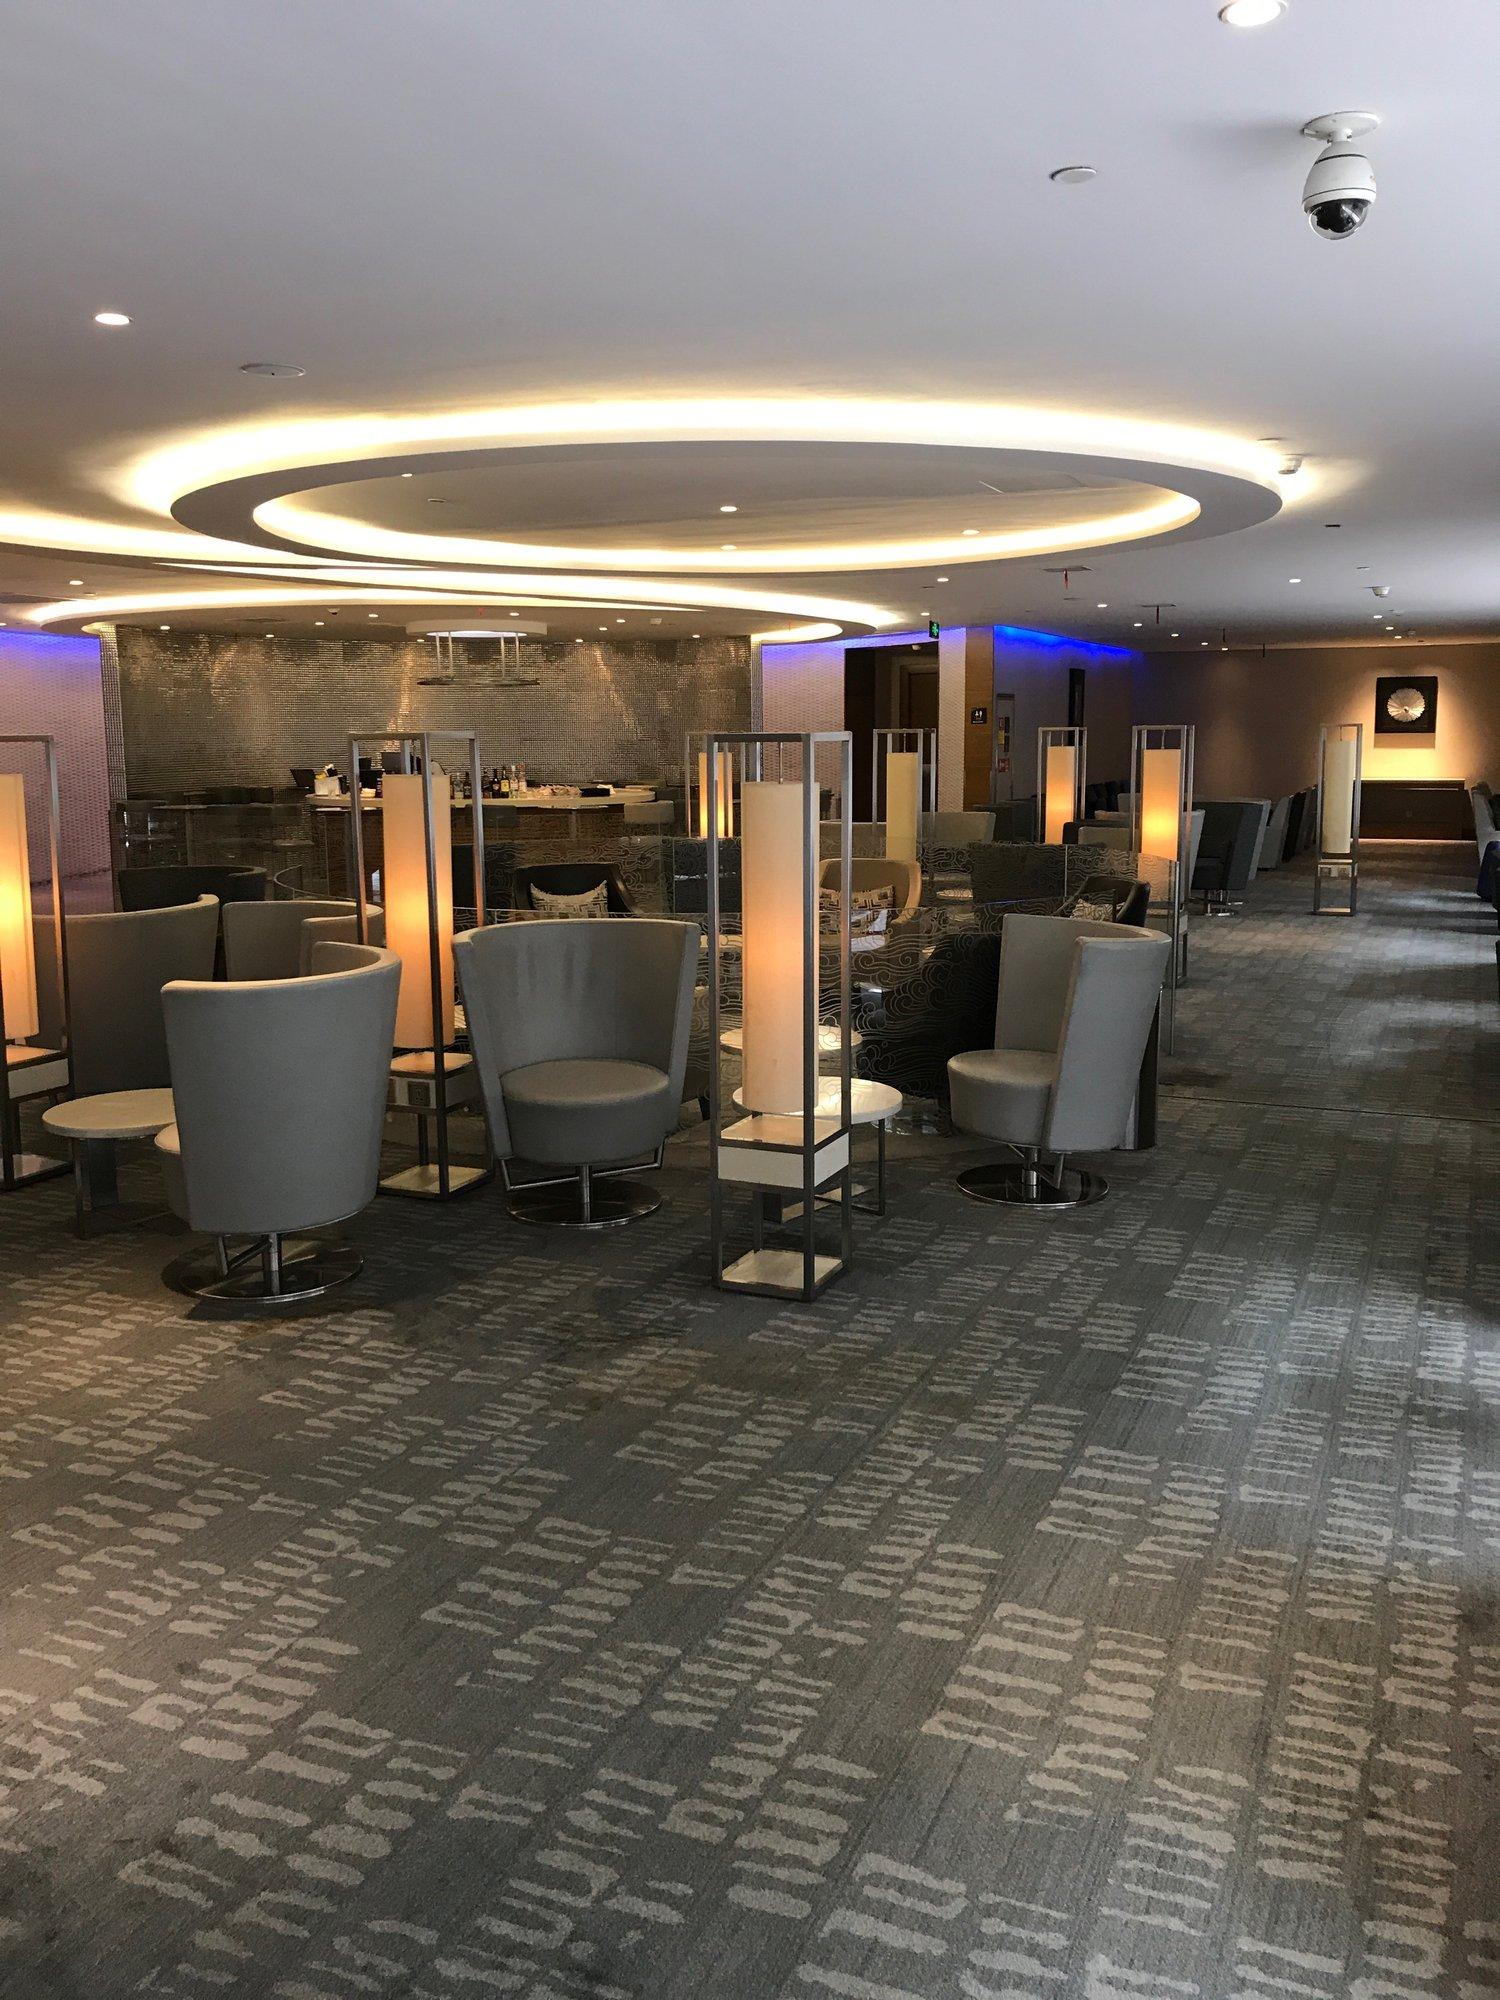 No. 71 Air China Business Class Lounge image 7 of 9